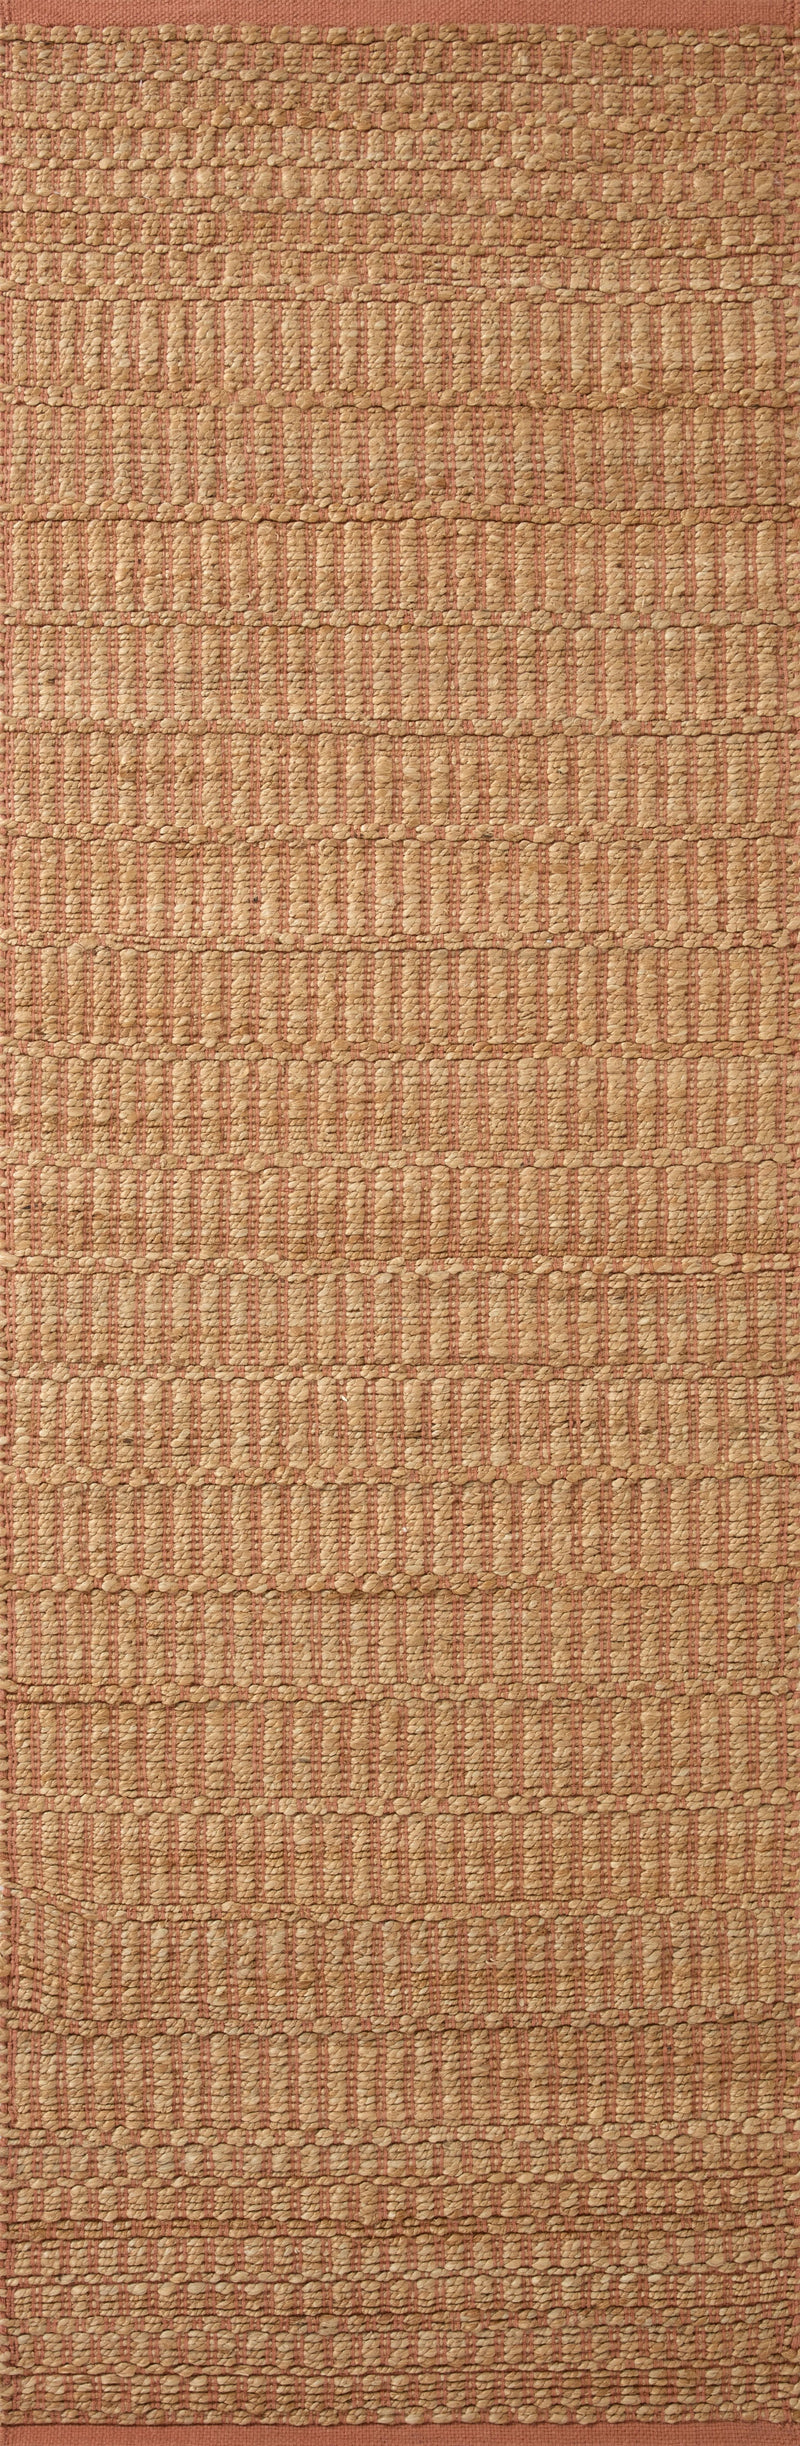 media image for colton hand woven natural clay rug by angela rose x loloi colocon 05nacg2030 2 220